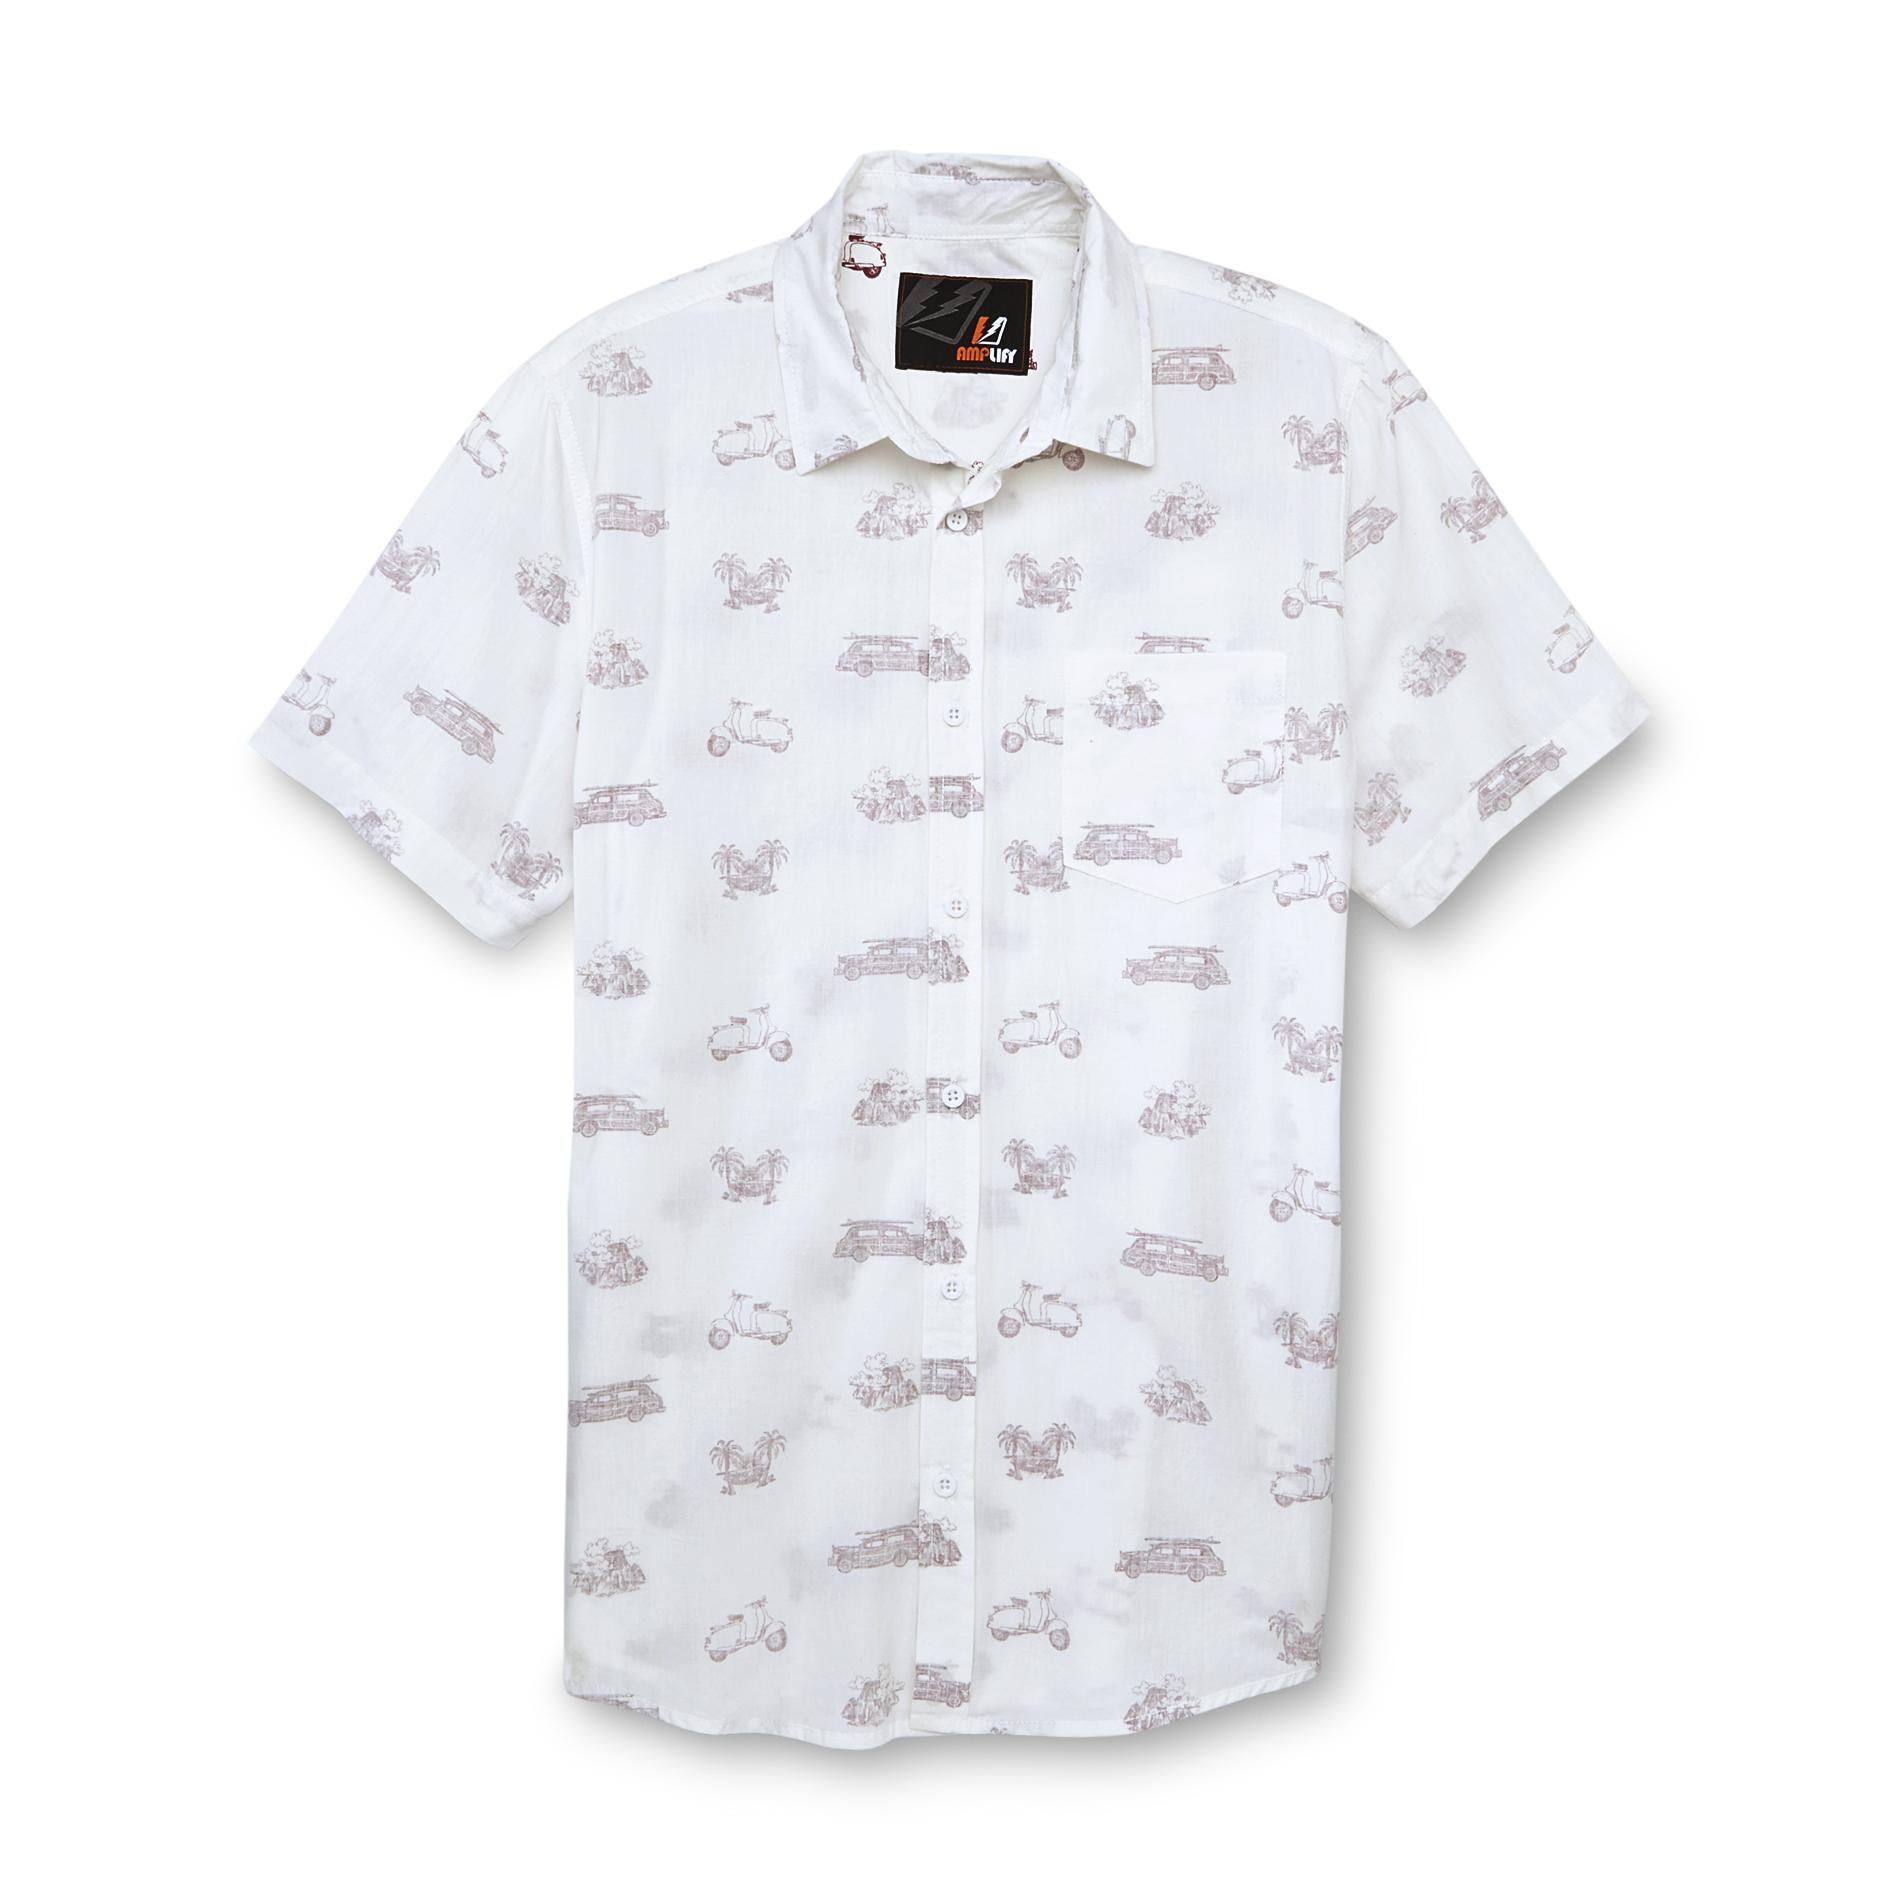 Amplify Young Men's Aloha Shirt - Scooters & Surf Wagons